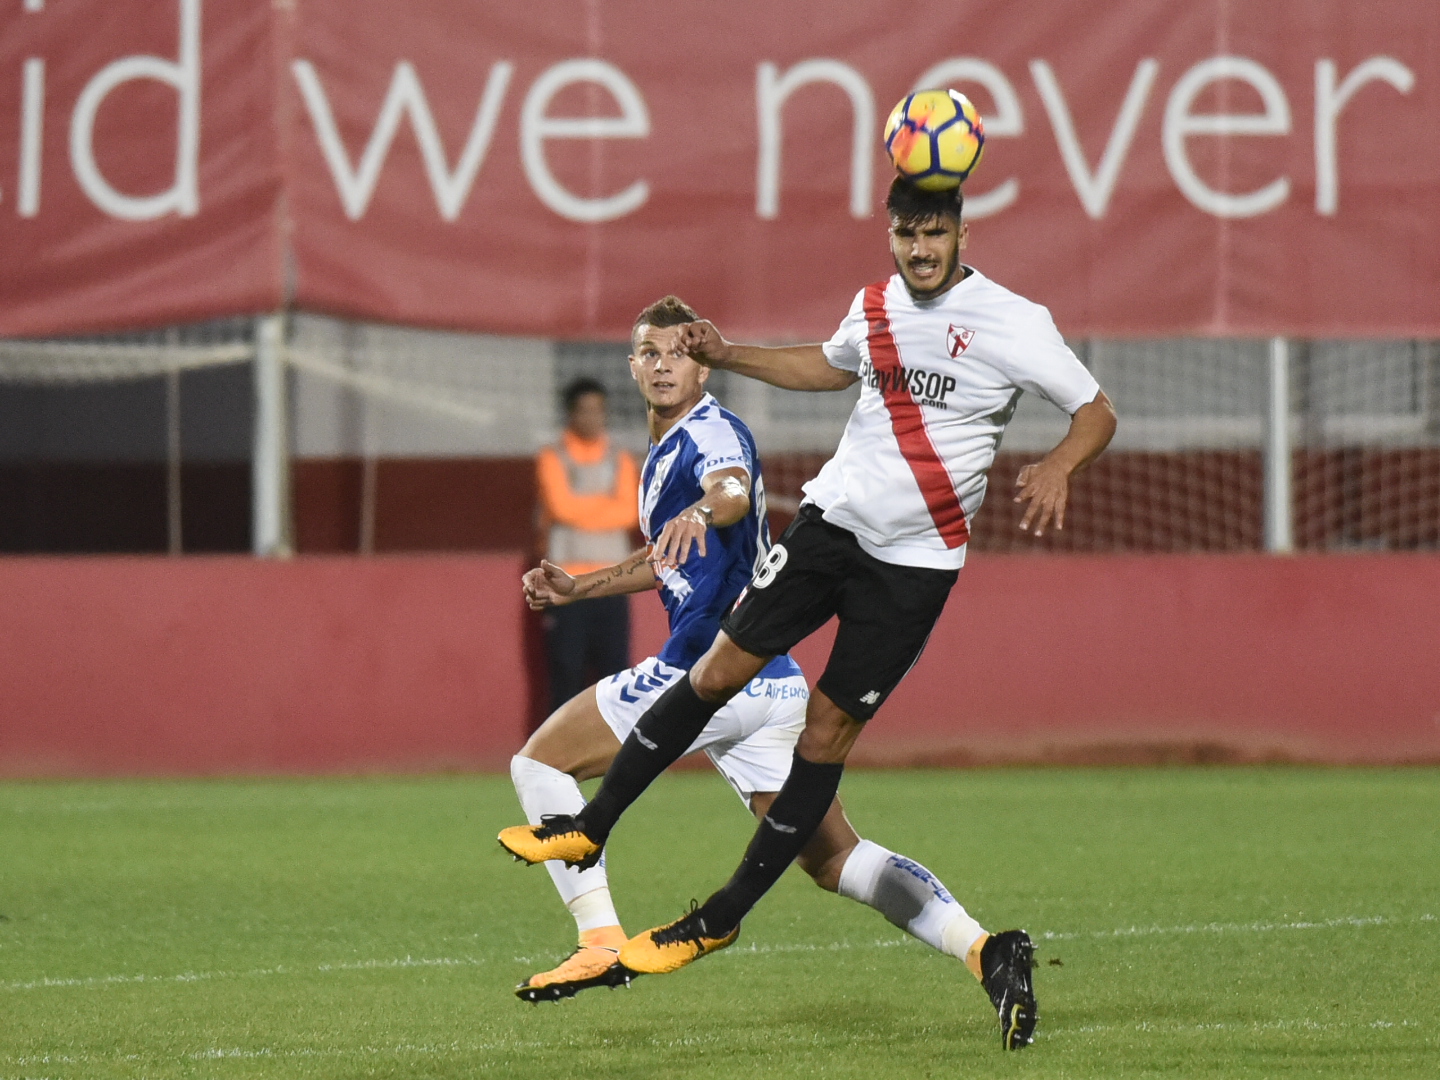 Berrocal in the match against Tenerife 